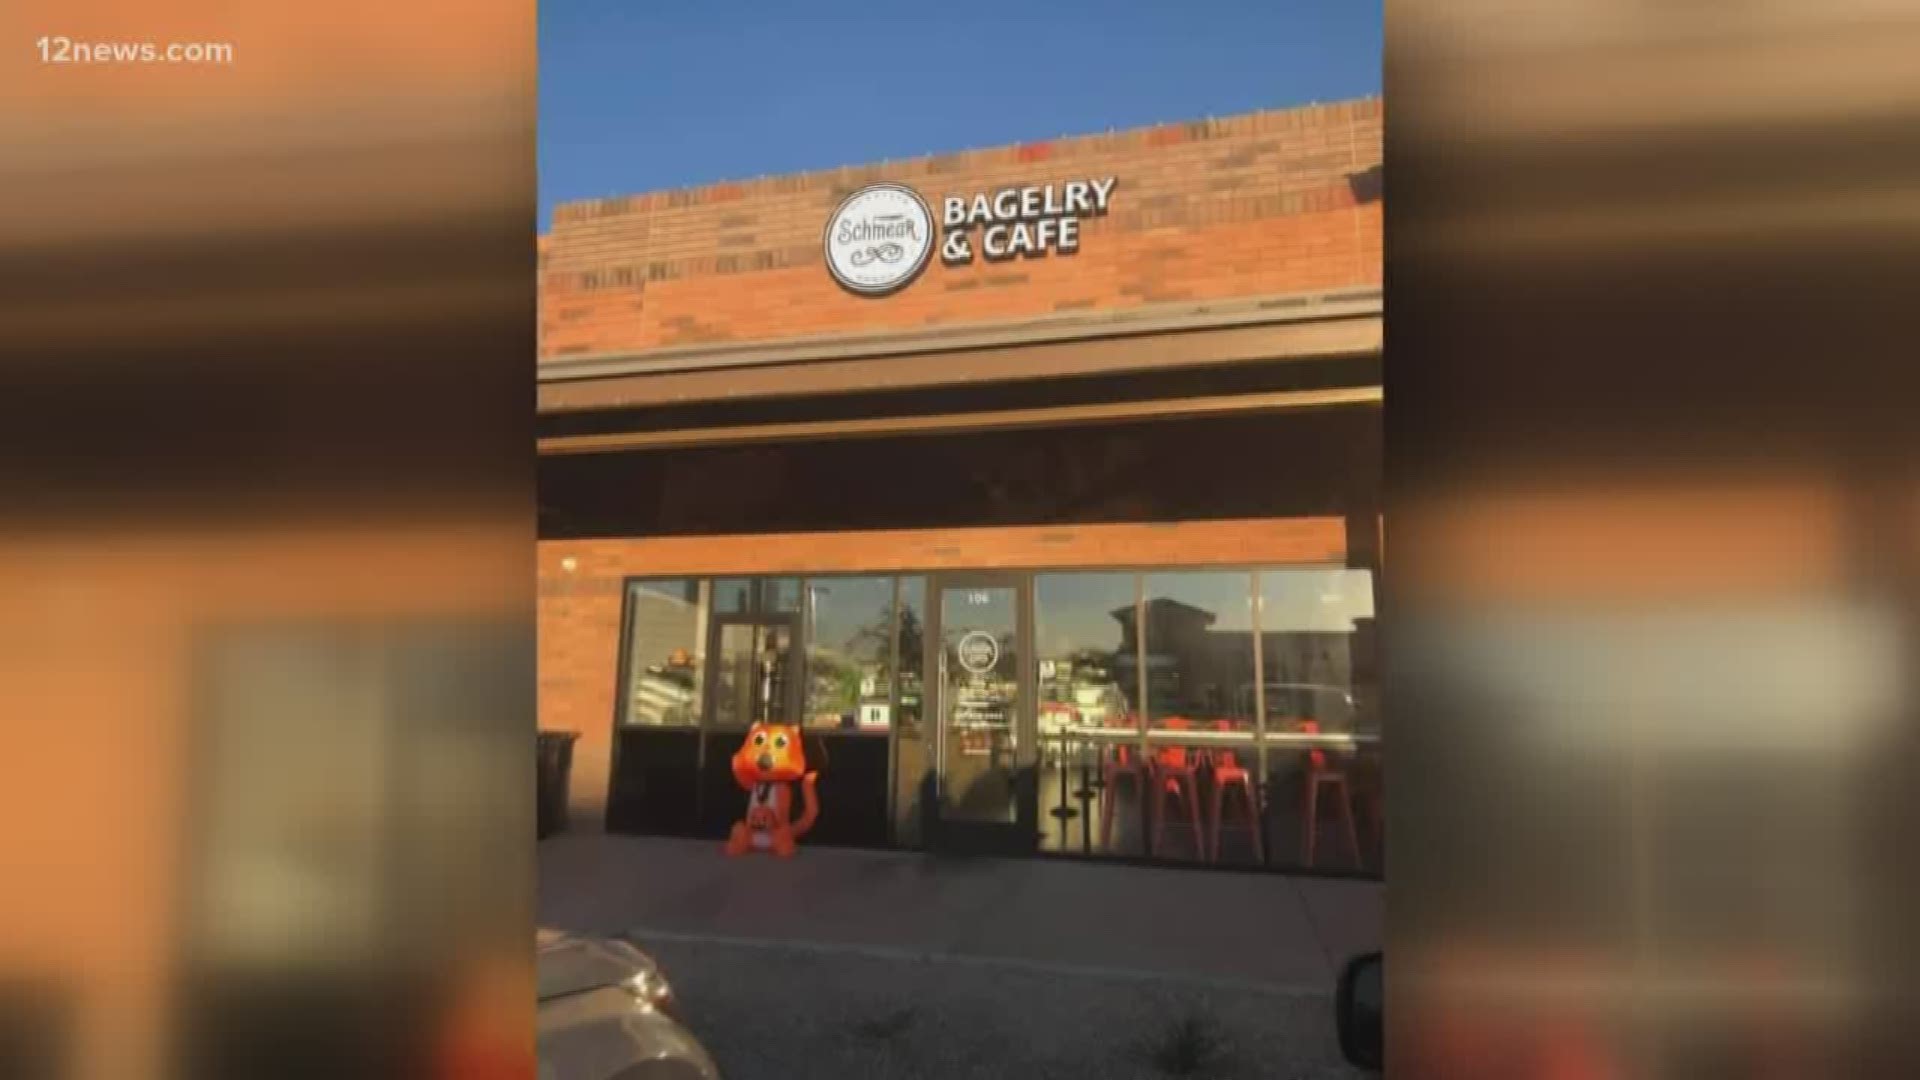 More than 10,000 small businesses in Arizona have been approved for loans to help pay their employees. One local business says the process takes some time.